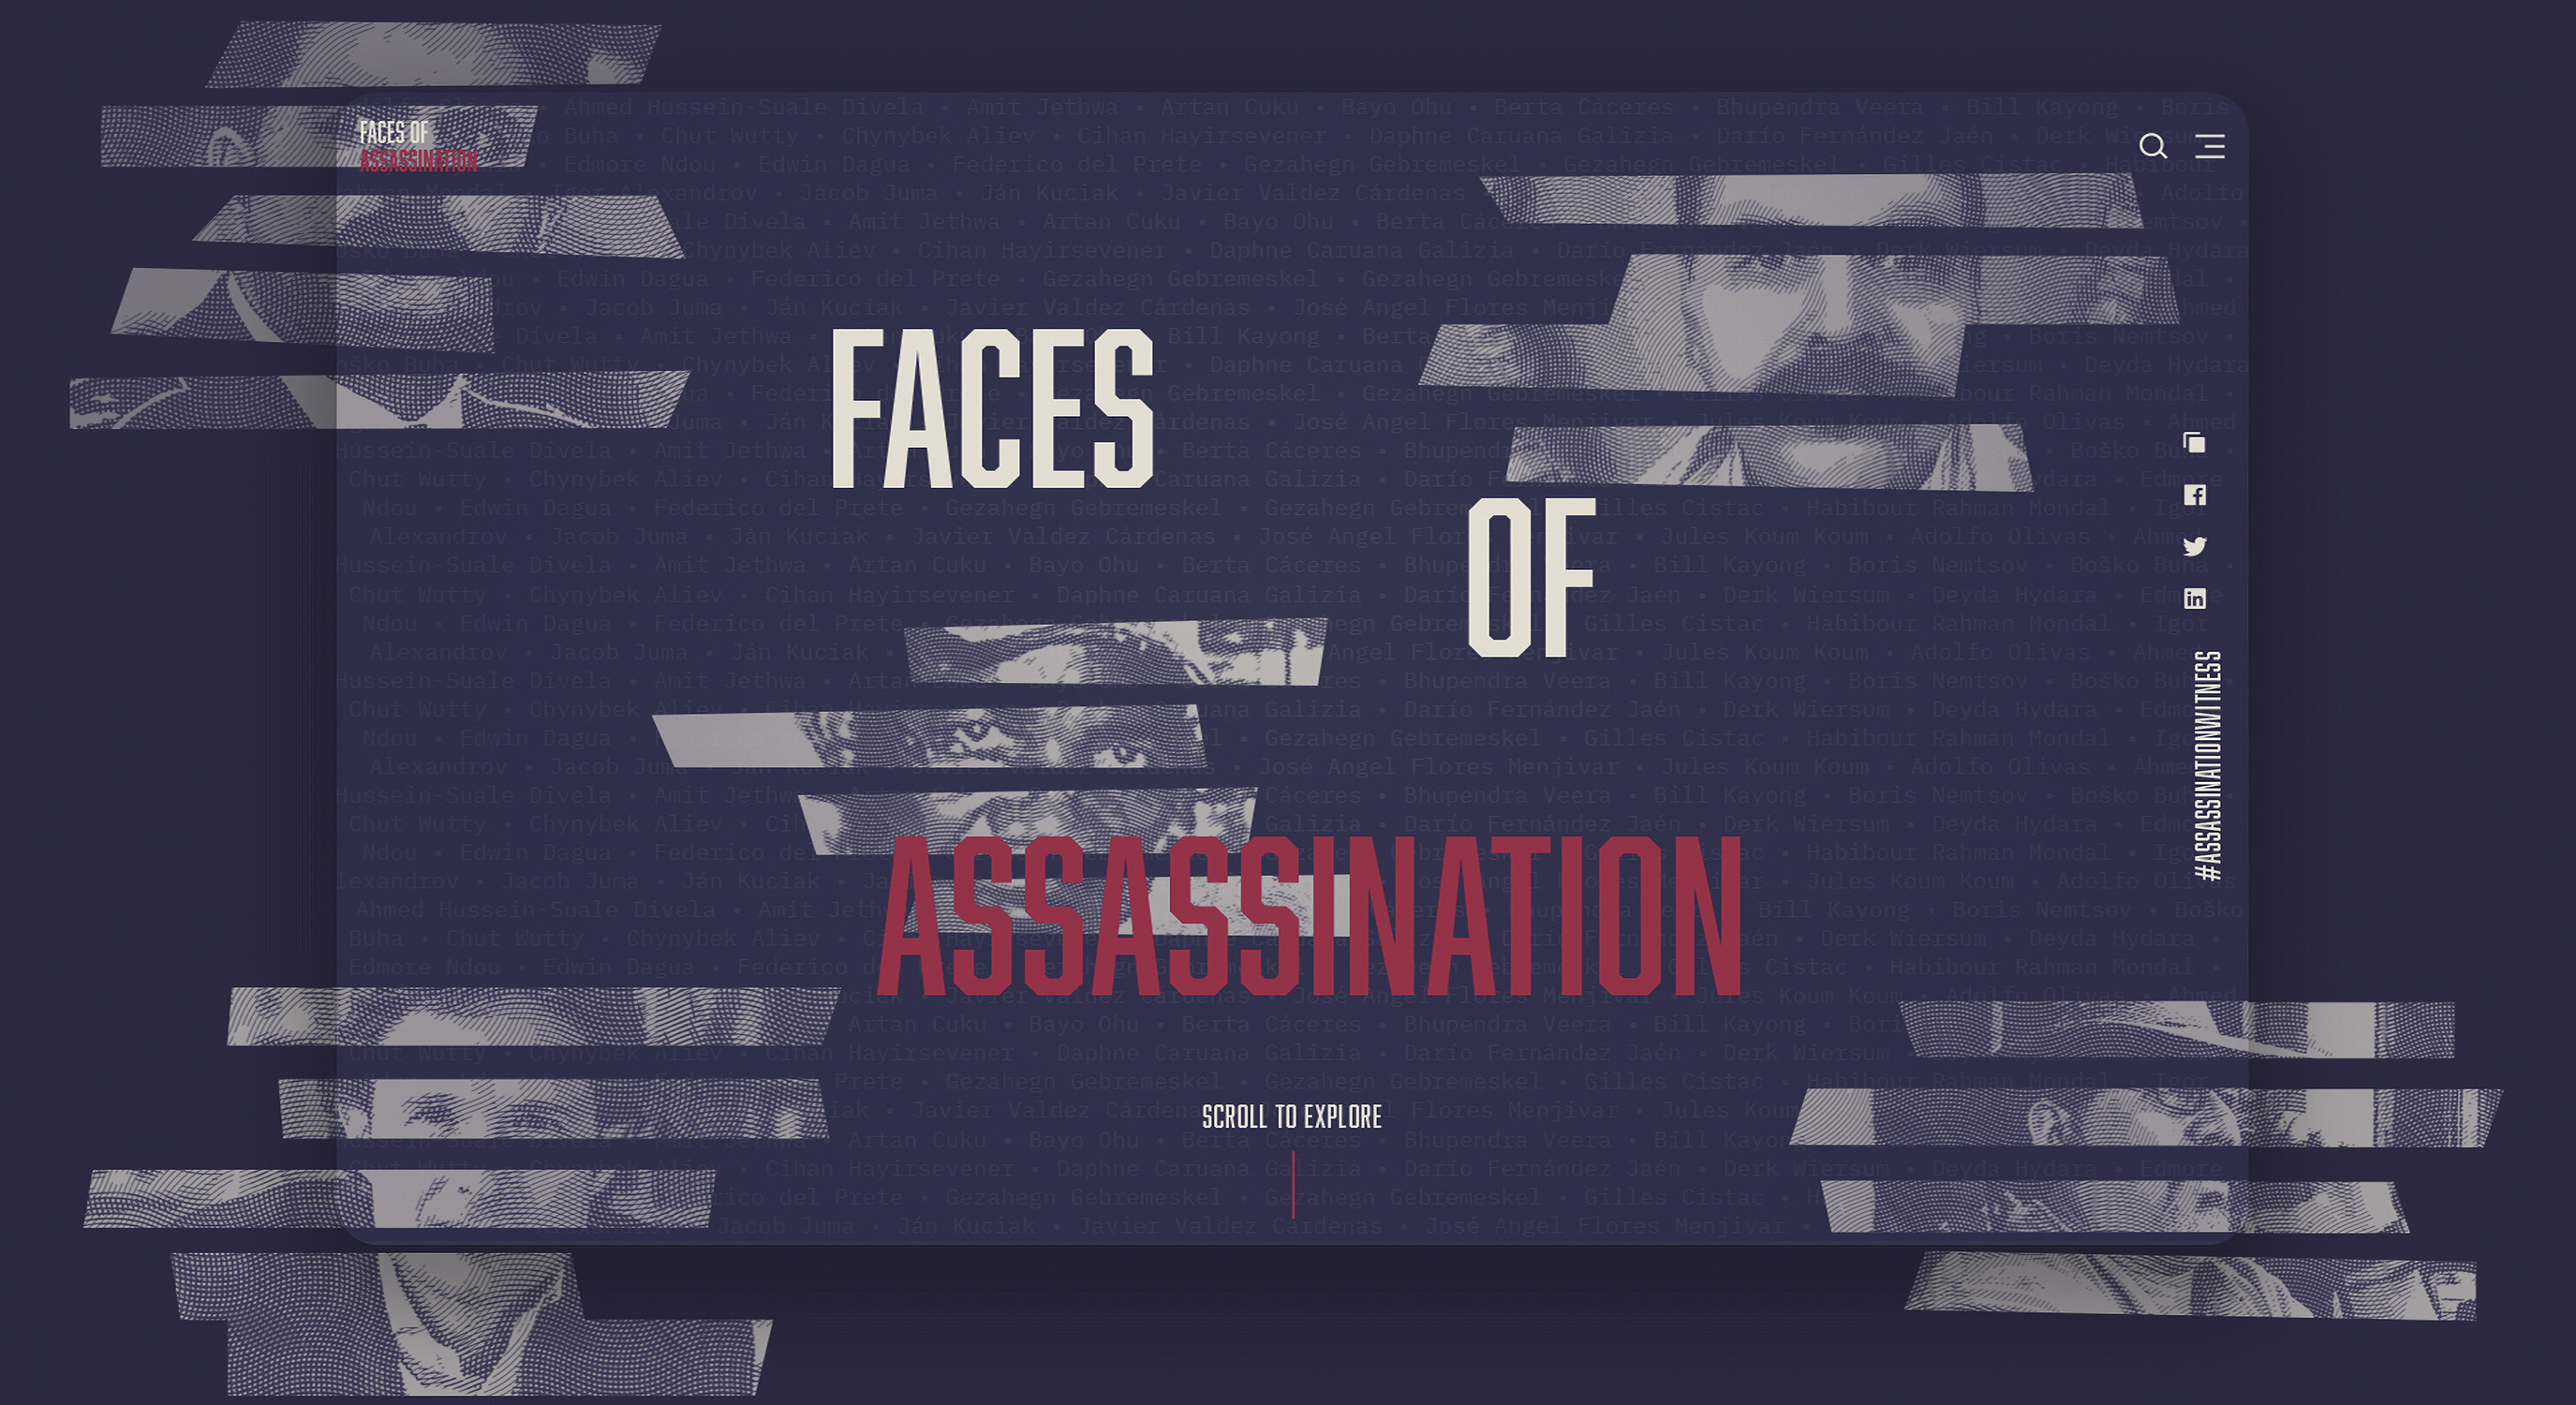 Faces of Assassination